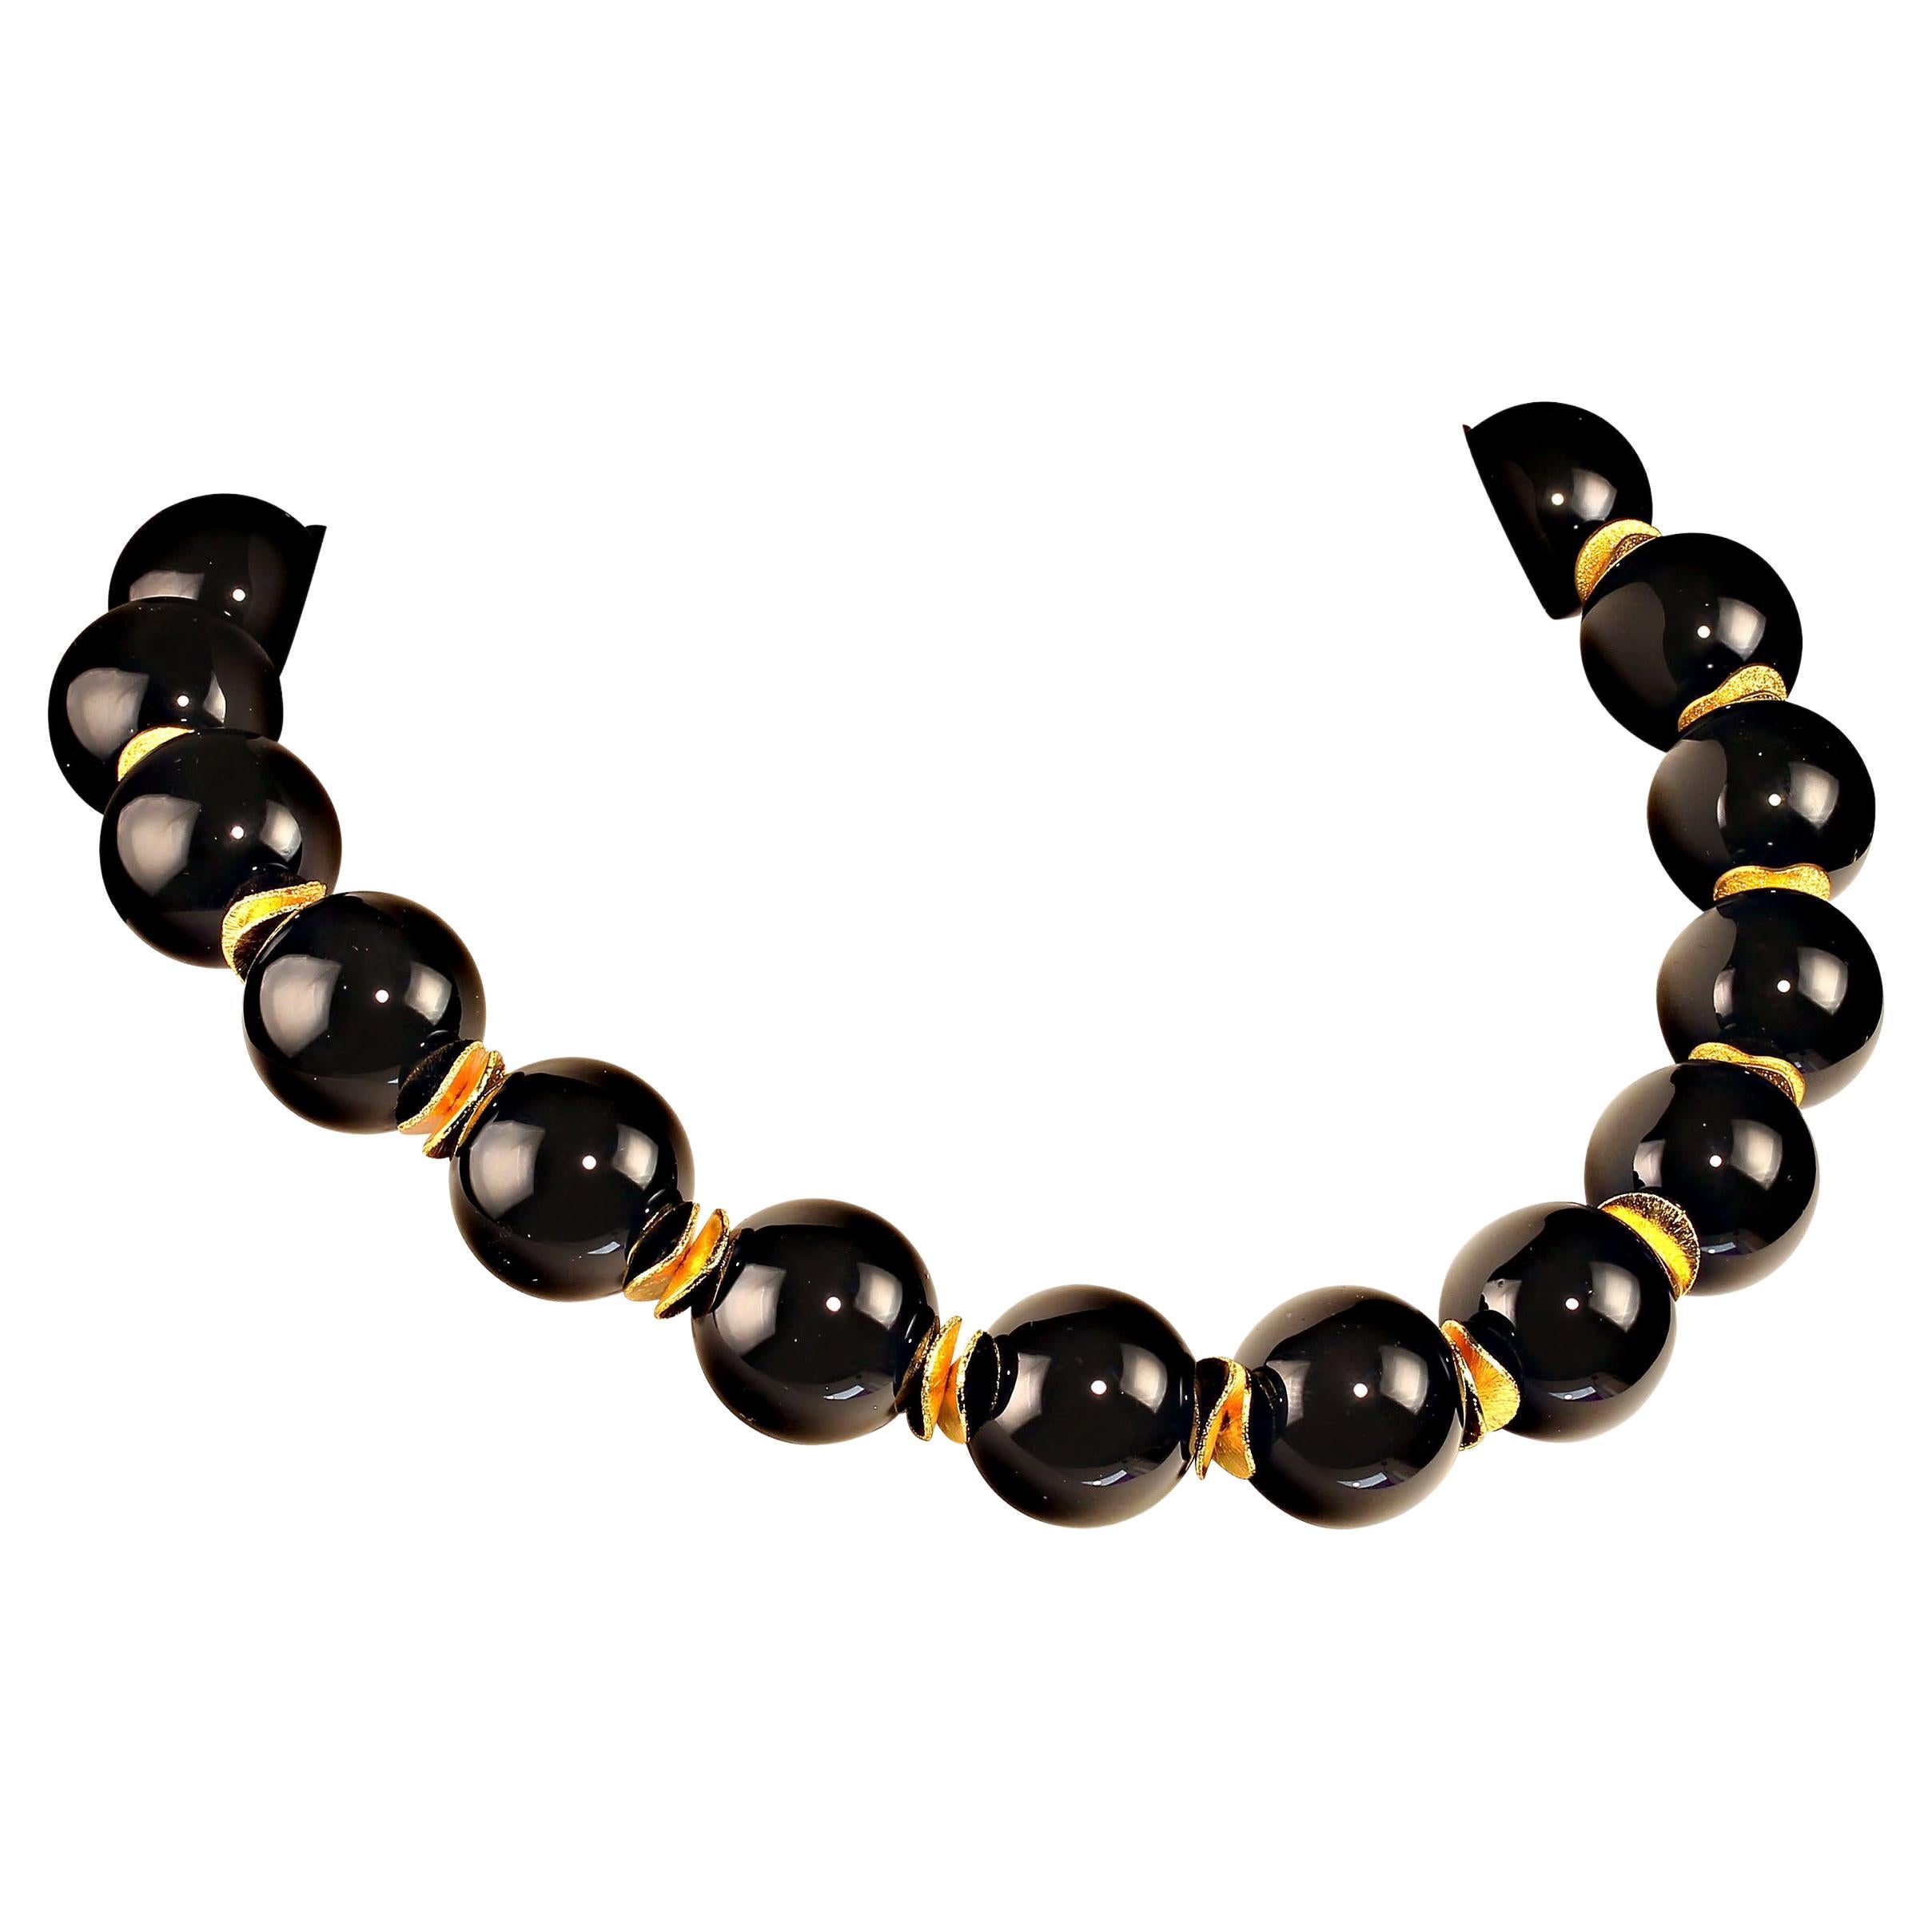 Striking Black Onyx Choker of highly polished 20MM spheres and gold tone flutter accents. The 17 inch Choker length necklace is secured with a vermeil toggle clasp.